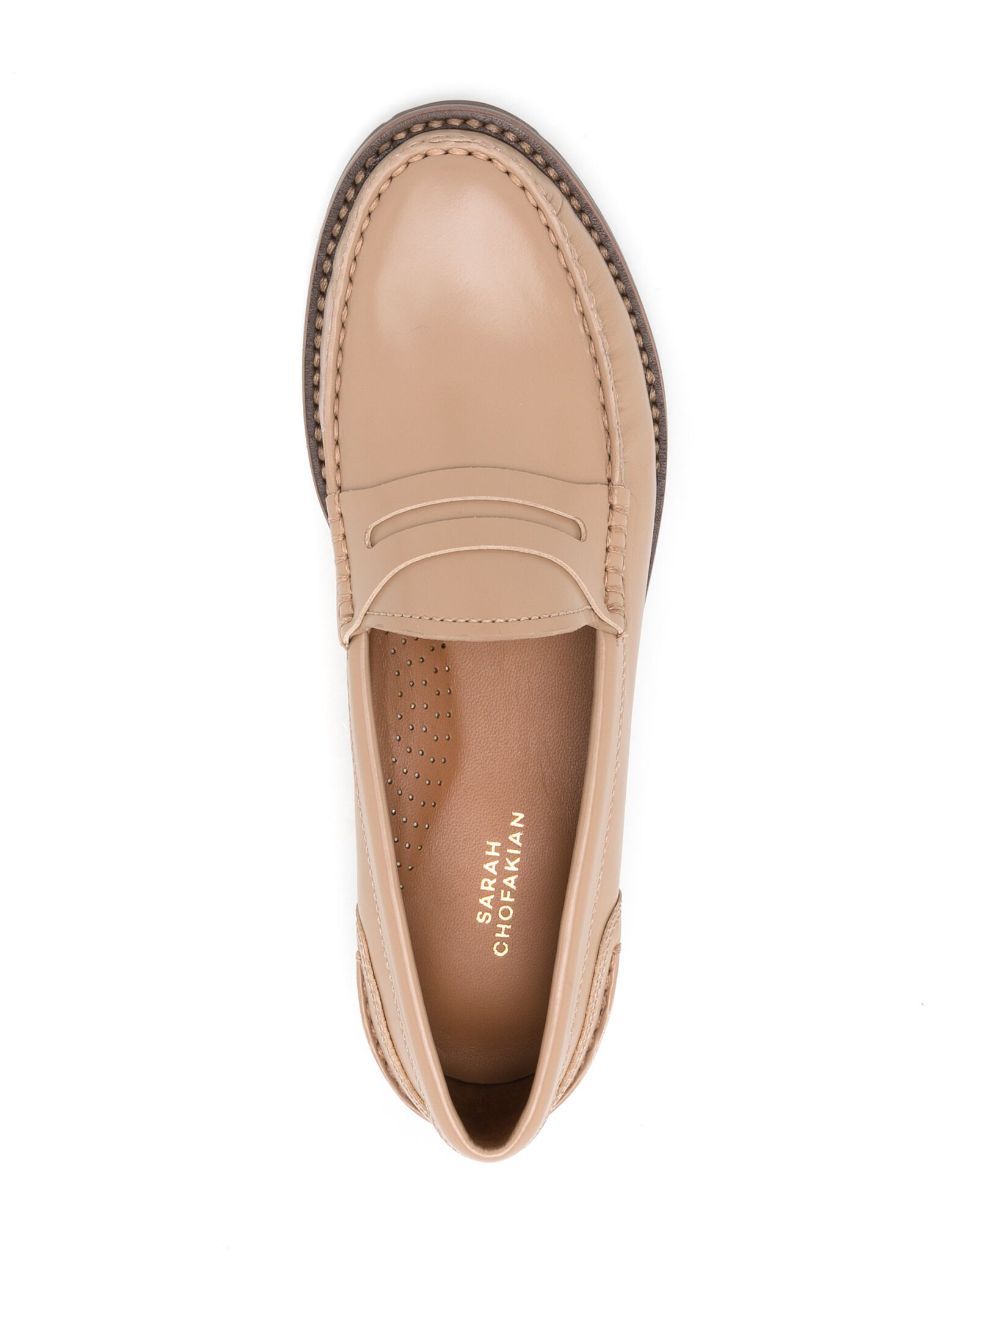 Shop Sarah Chofakian Rive Gauche Penny Loafers In Sand